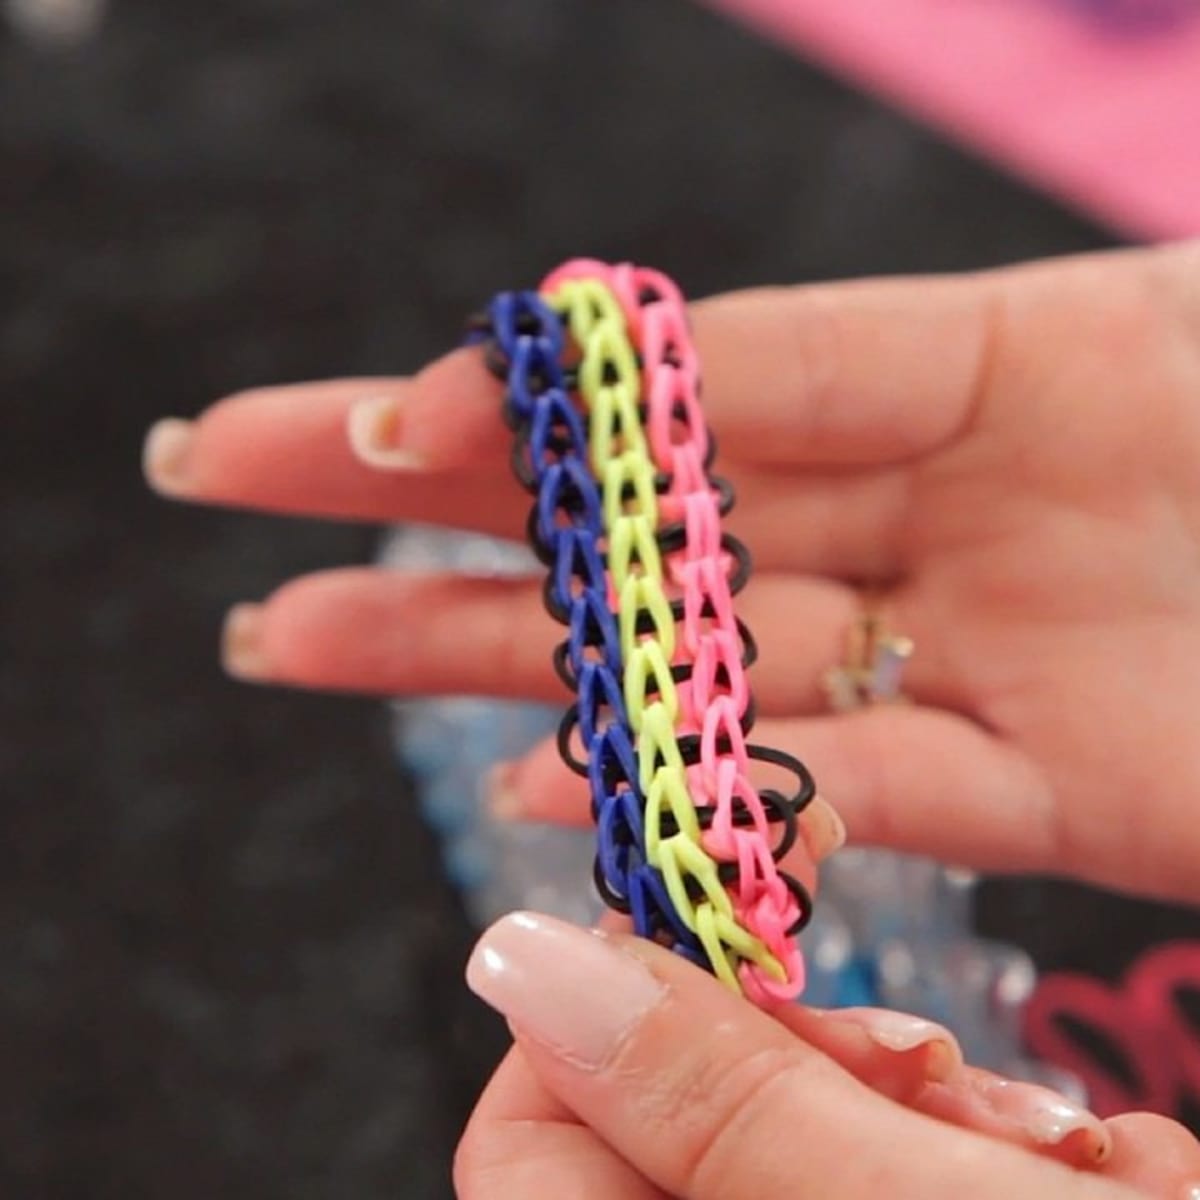 How To Make Rubber Band Bracelets - 10 Favorite Rainbow Loom Patterns that  Kids Can Make! | Rainbow loom, Rainbow loom patterns, Rainbow loom rubber  bands